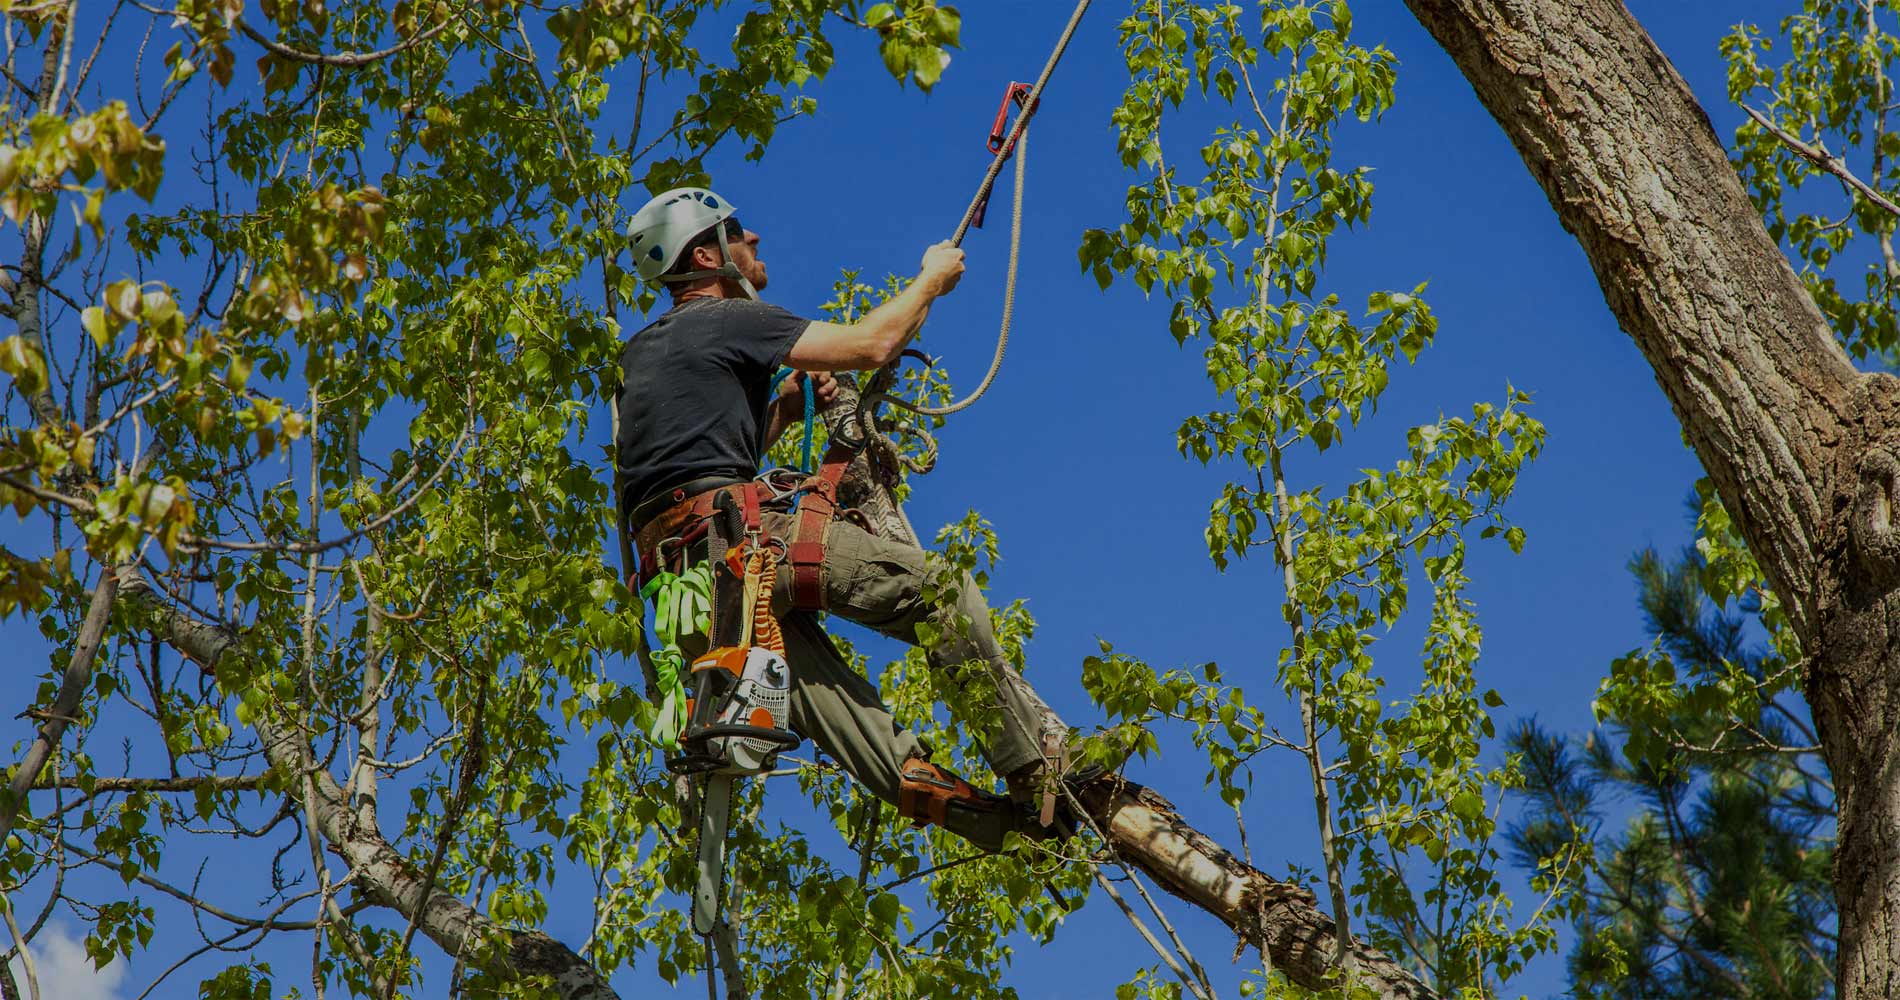 South Jersey Tree Removal - M.C. Professional Tree Service